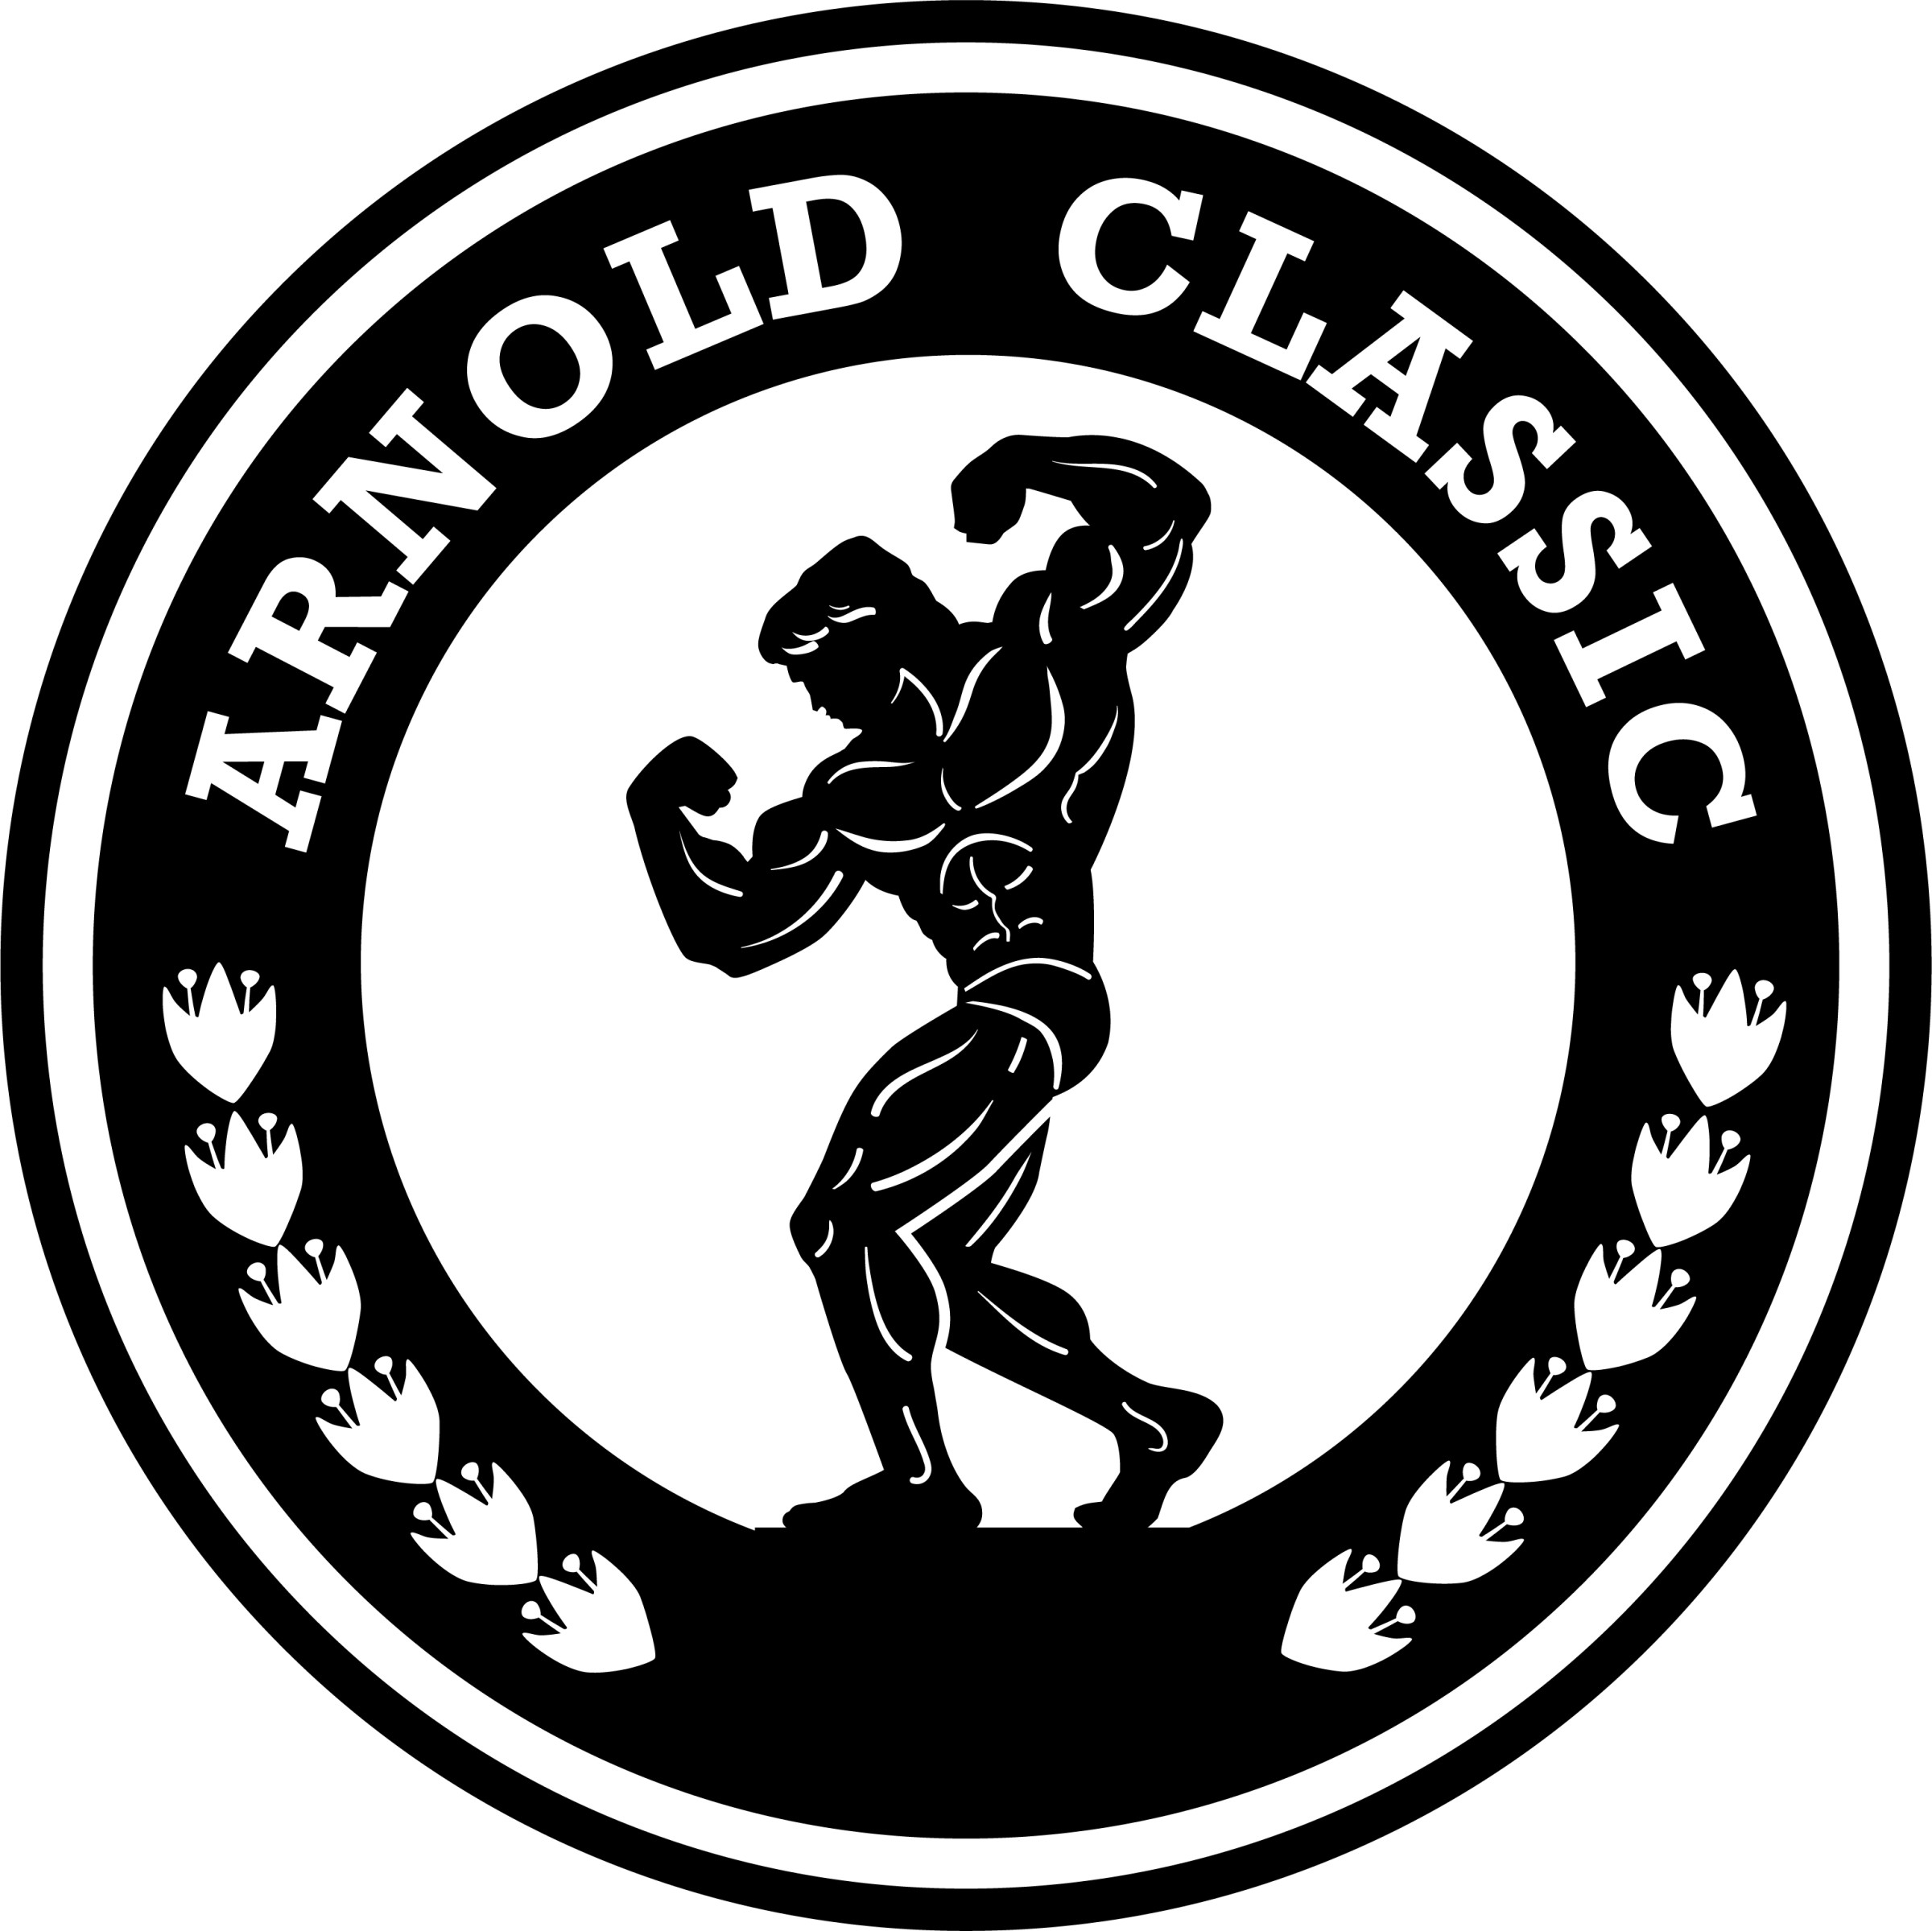 ARNOLD CLASSIC TO INCREASE MEN’S OPEN BODYBUILDING FIRSTPLACE PRIZE